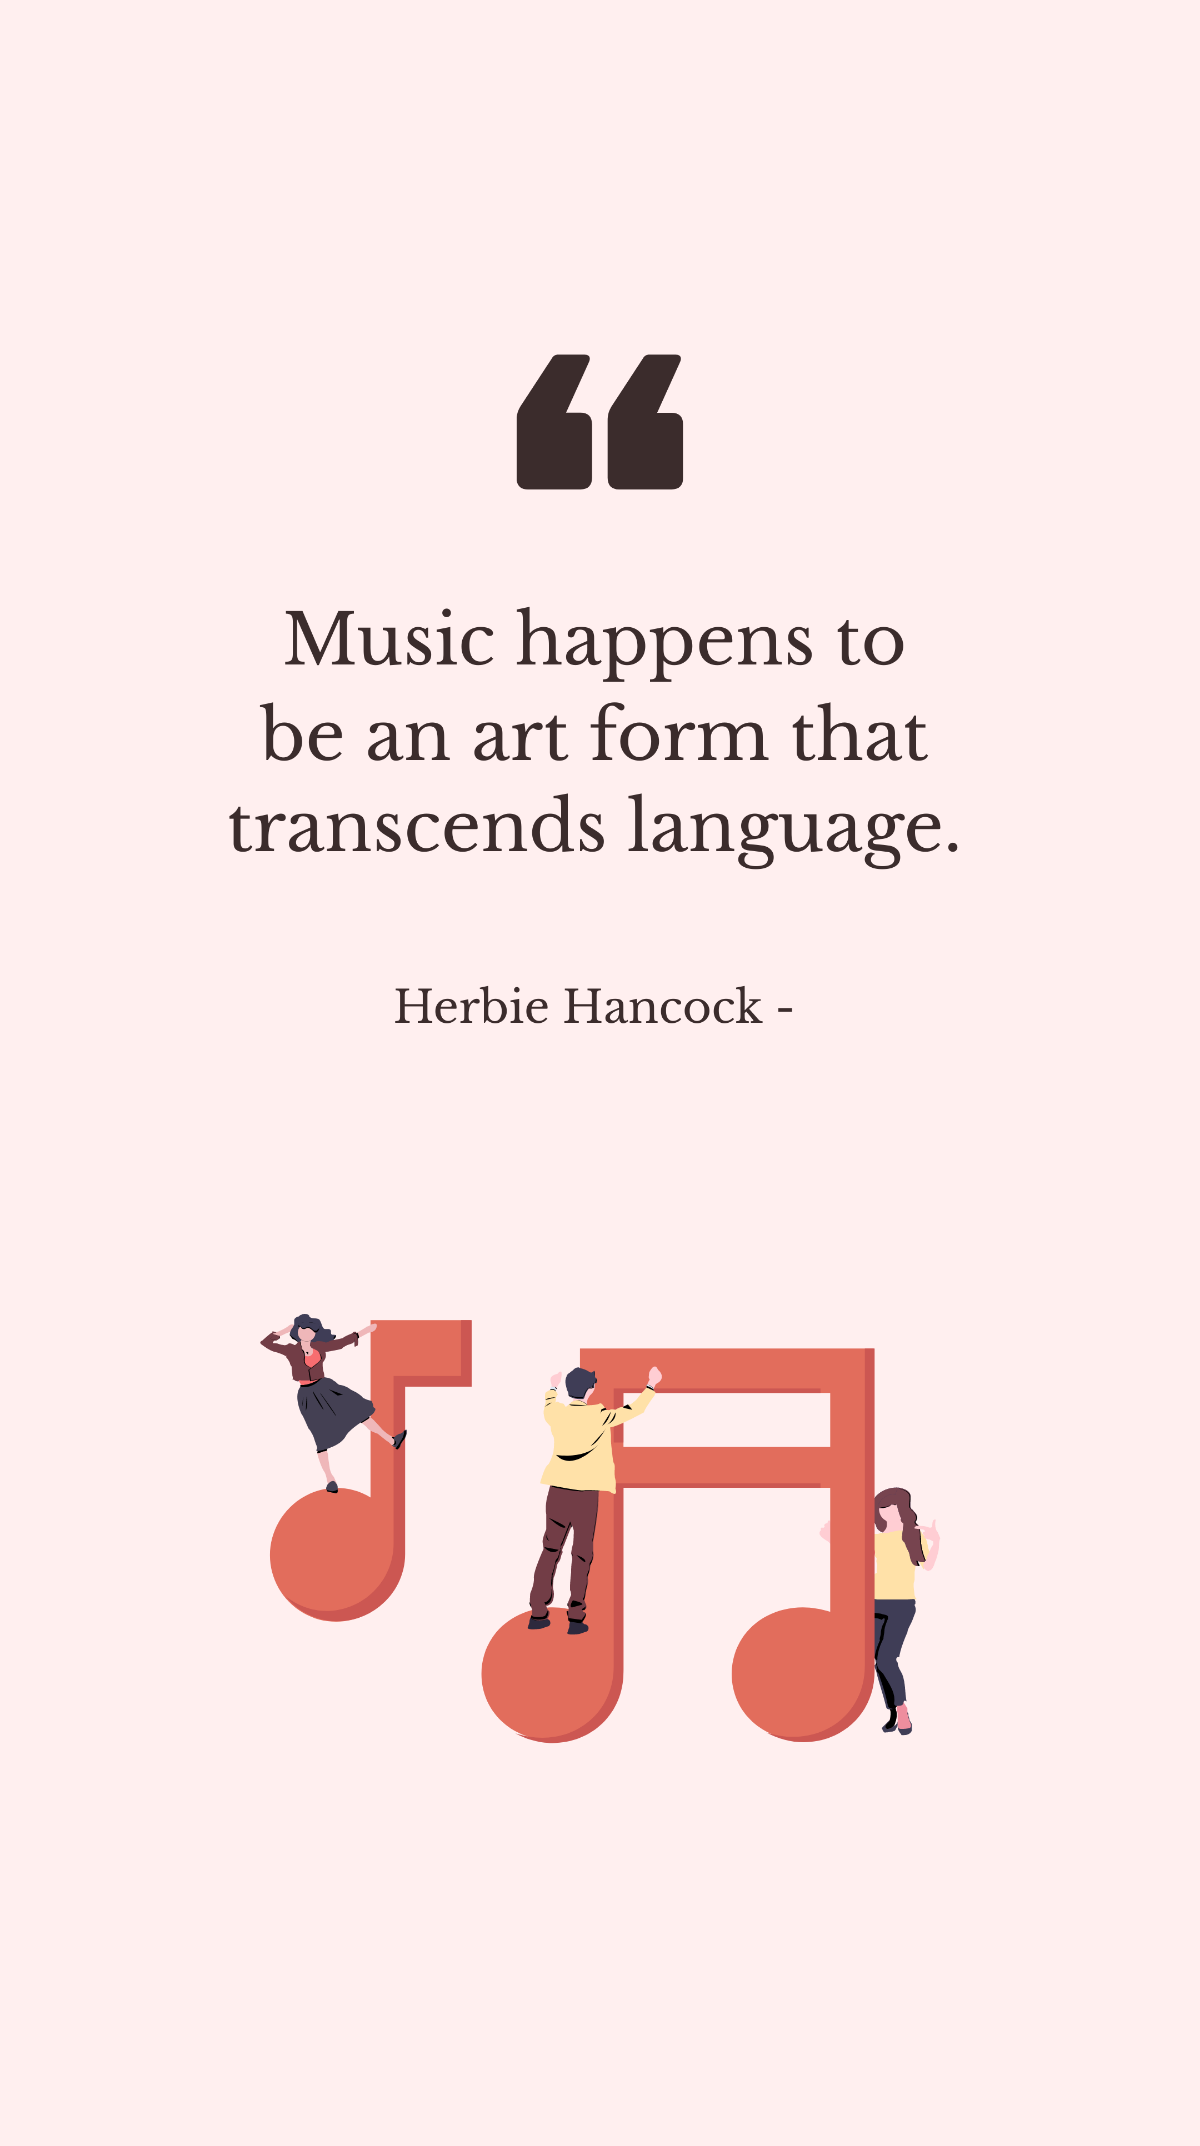 Herbie Hancock - Music happens to be an art form that transcends language. Template